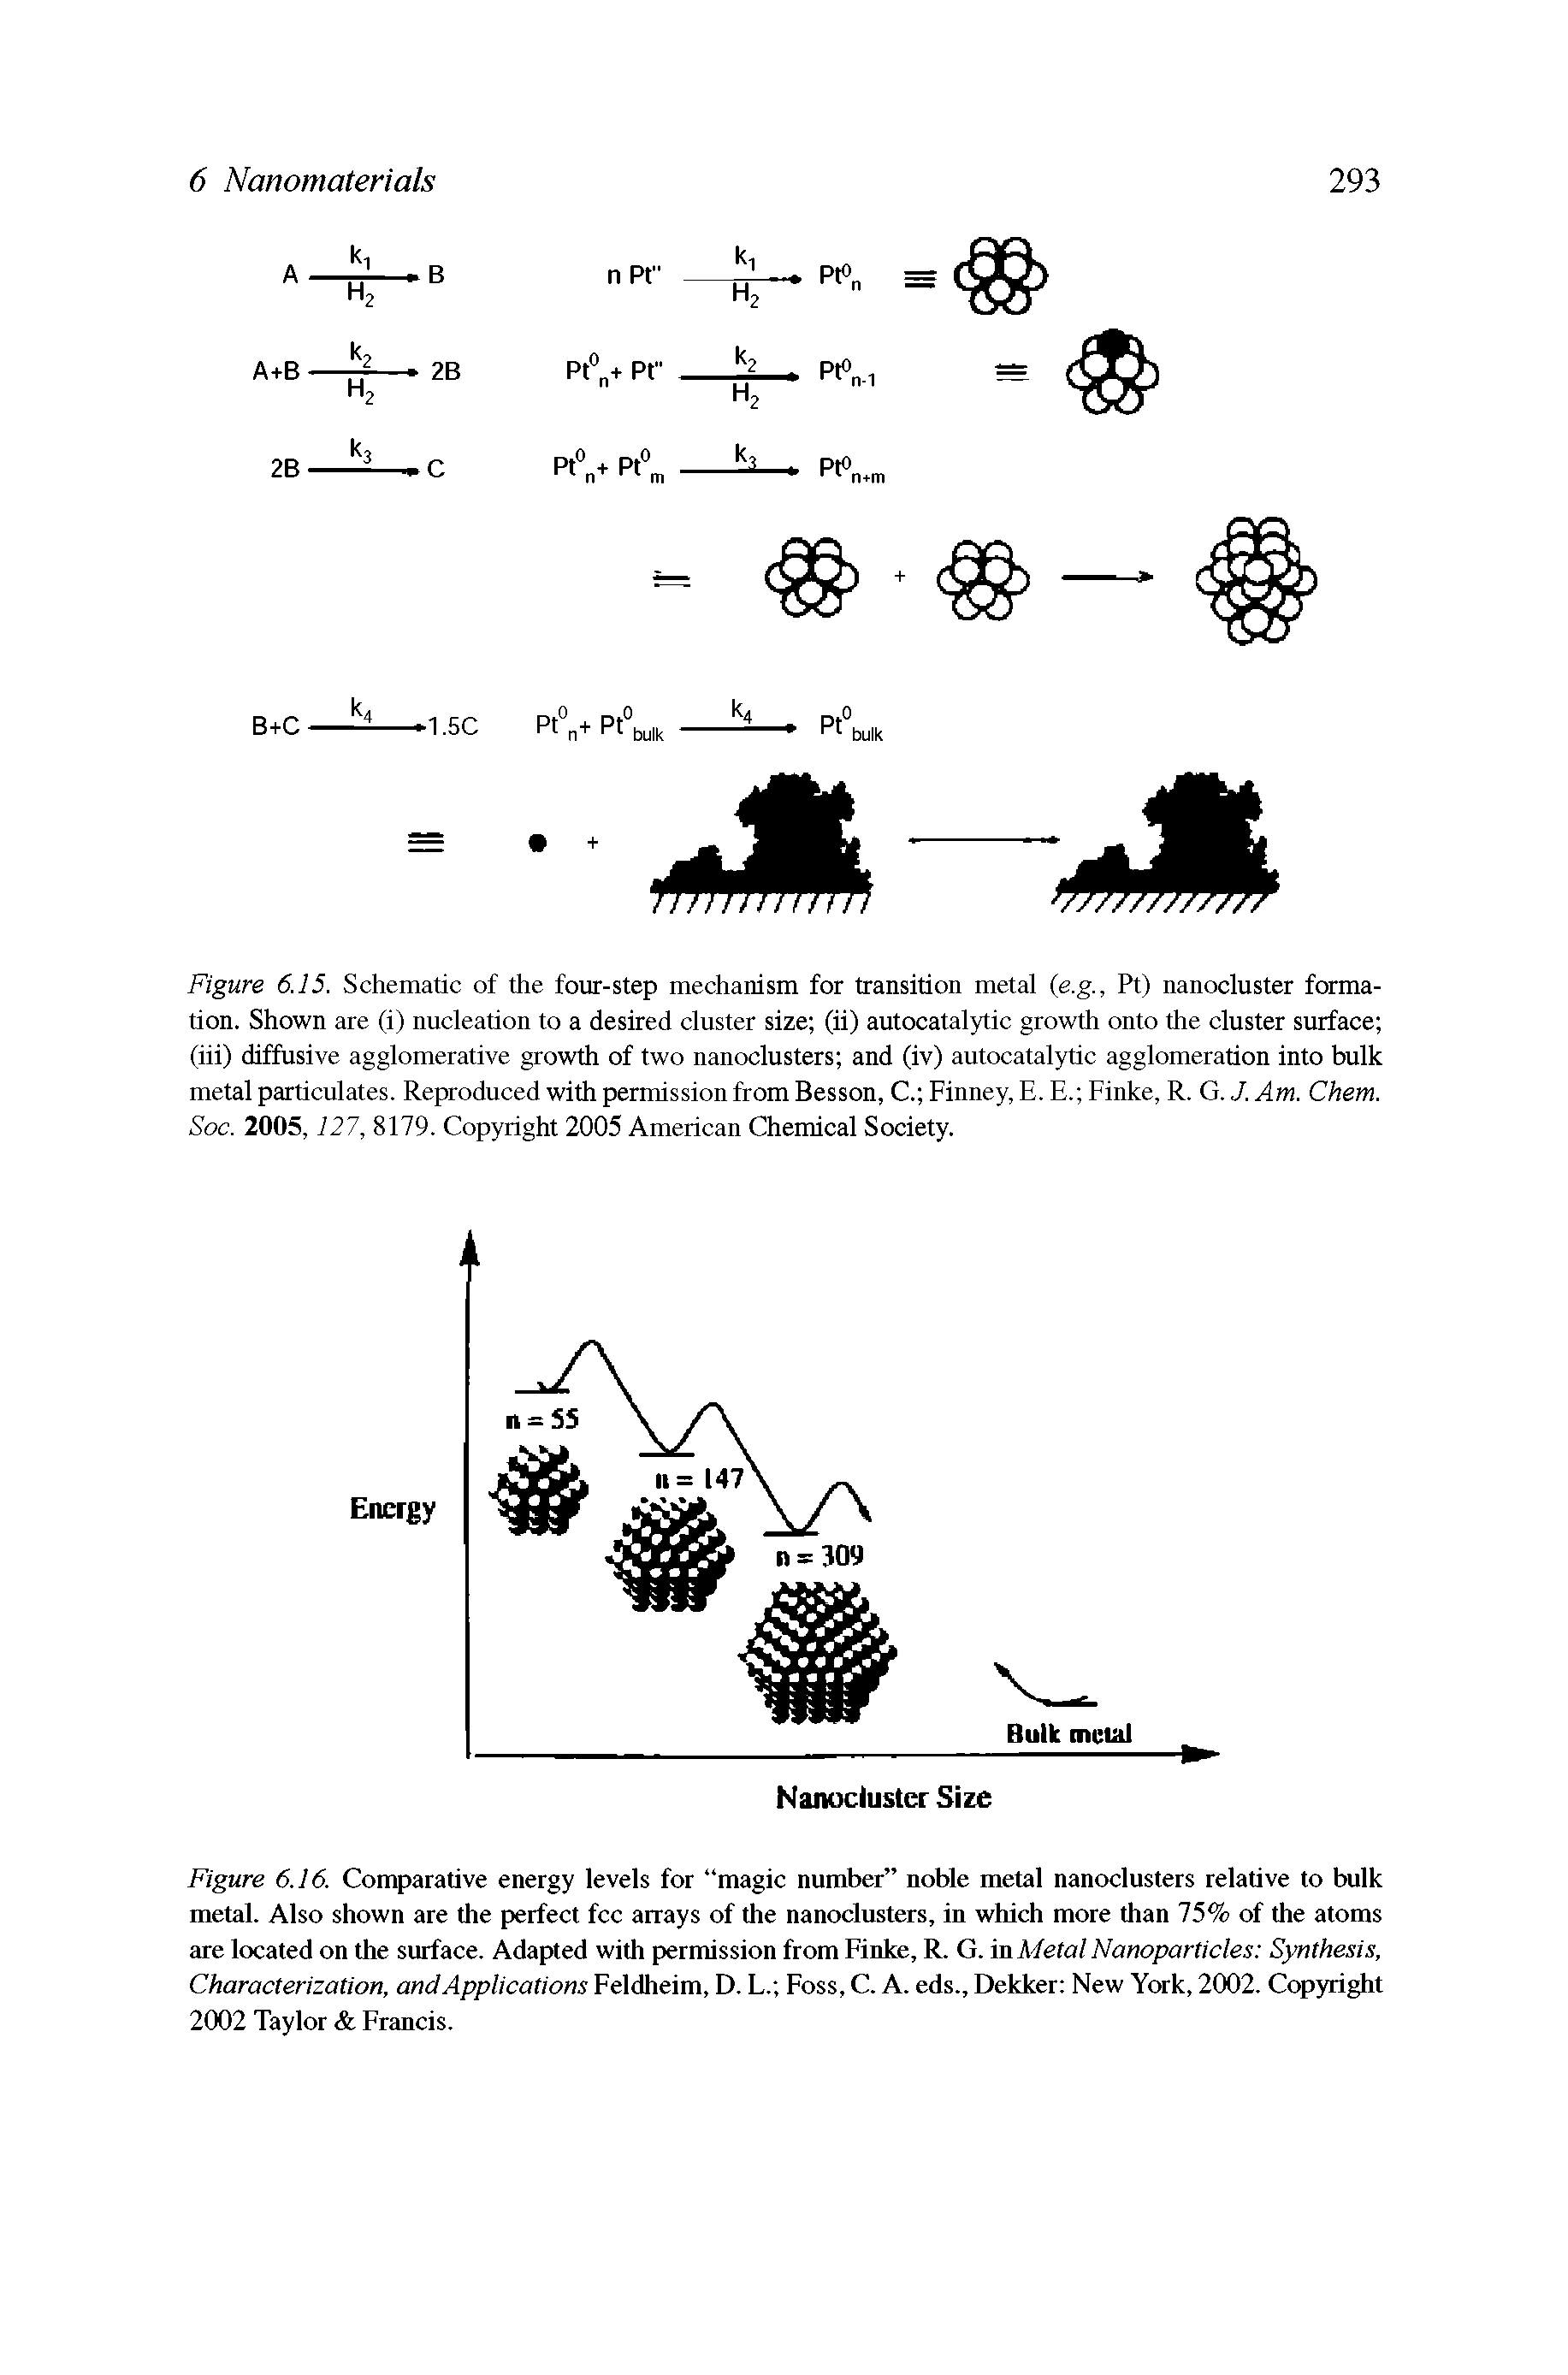 Figure 6.15. Schematic of the four-step mechanism for transition metal (e.g., Pt) nanocluster formation. Shown are (i) nucleation to a desired cluster size (ii) autocatalytic growth onto the cluster surface (hi) diffusive agglomerative growth of two nanoclusters and (iv) autocatalytic agglomeration into bulk metal particulates. Reproduced with permission from Besson, C. Finney, E. E. Einke, R. G. J. Am. Chem. Soc. 2005,127, an9. Copyright 2005 American Chemical Society.